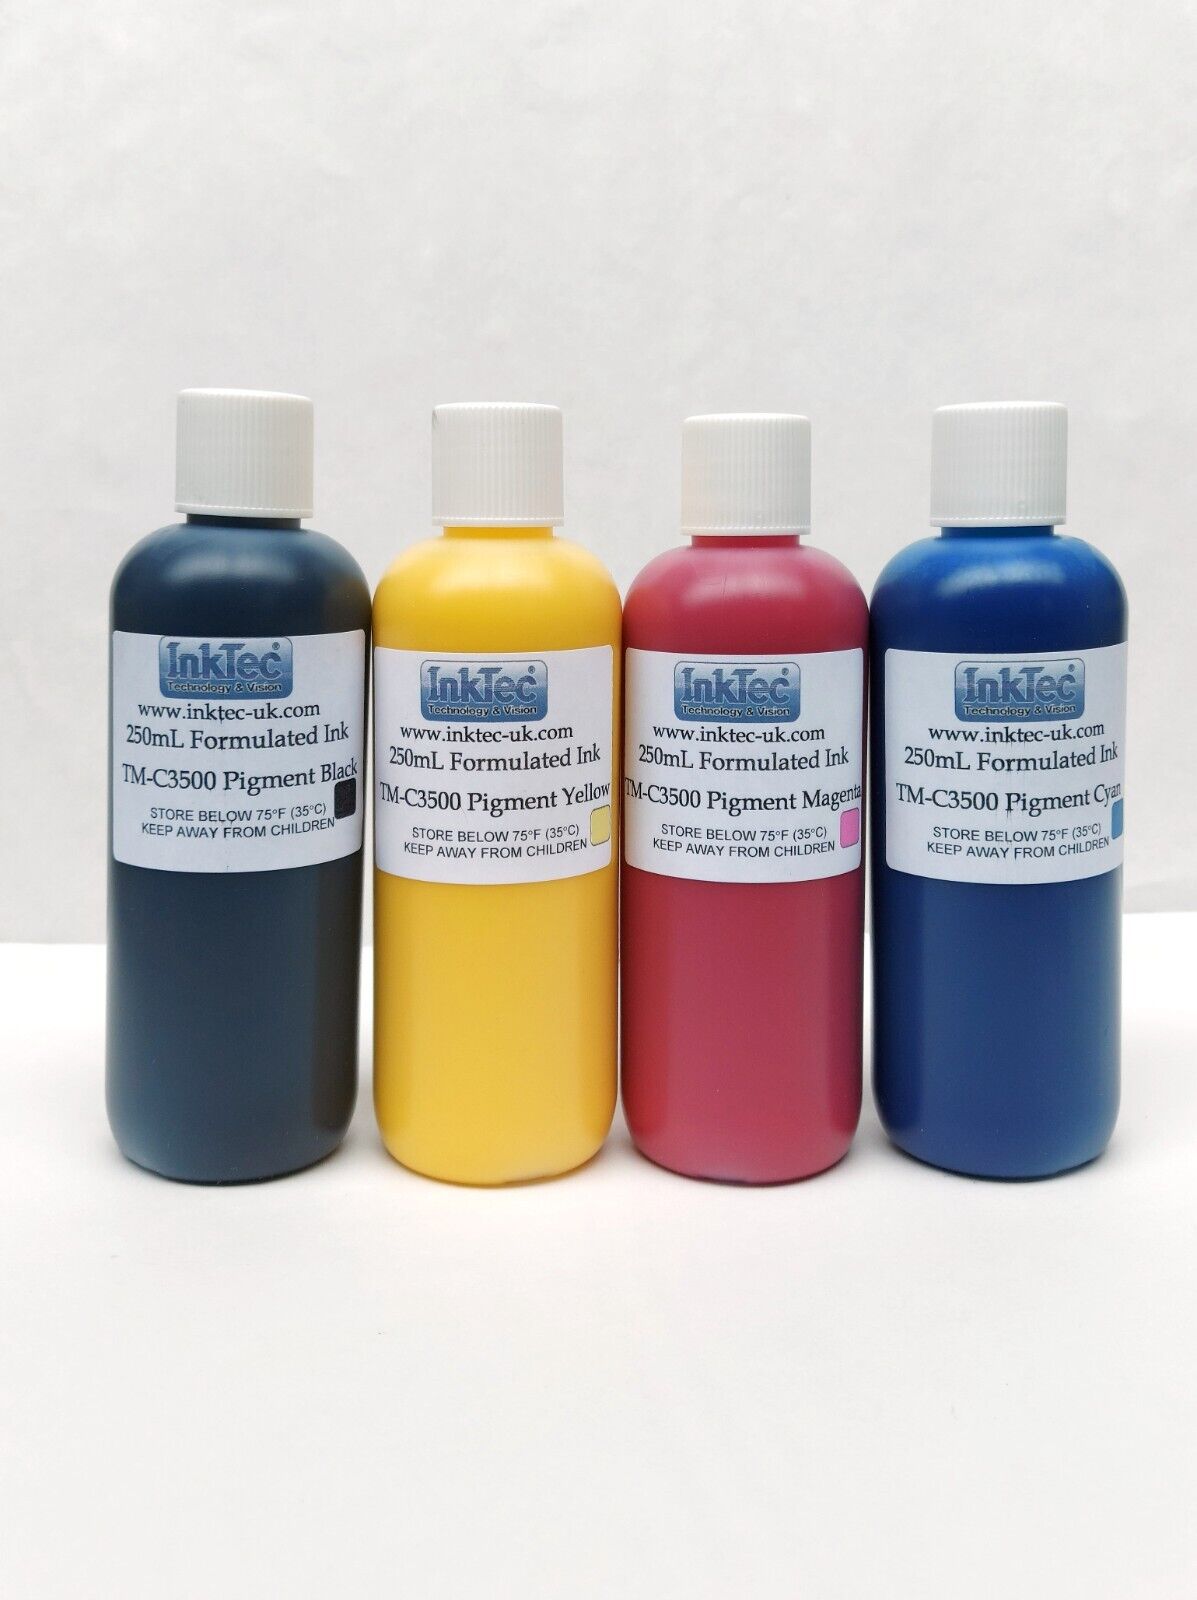 High Quality Inktec Pigment Ink Refill 4x 250ml for Epson TM-C3500